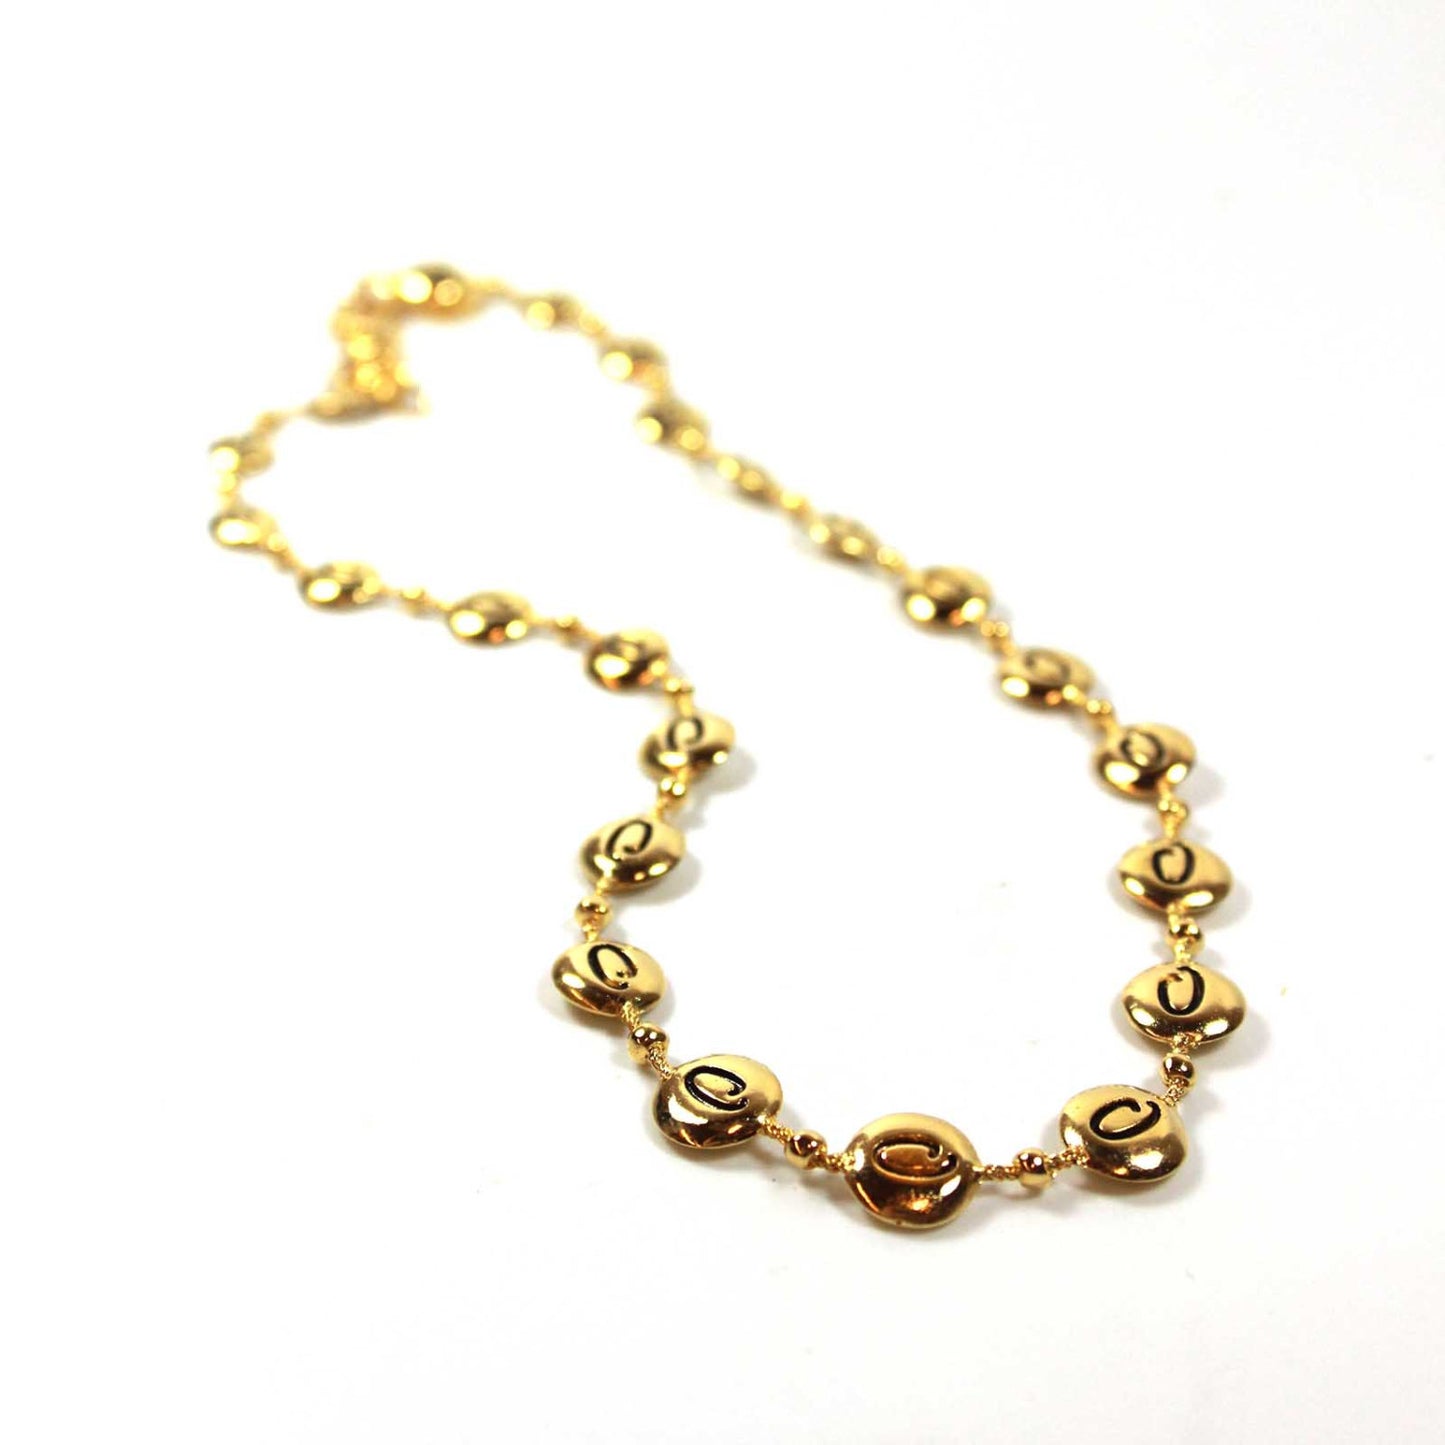 Vintage Oscar De La Renta 15 Inch Gold Tone "O" Insignia Beaded Chain Necklace S Hook with Extender #OS121